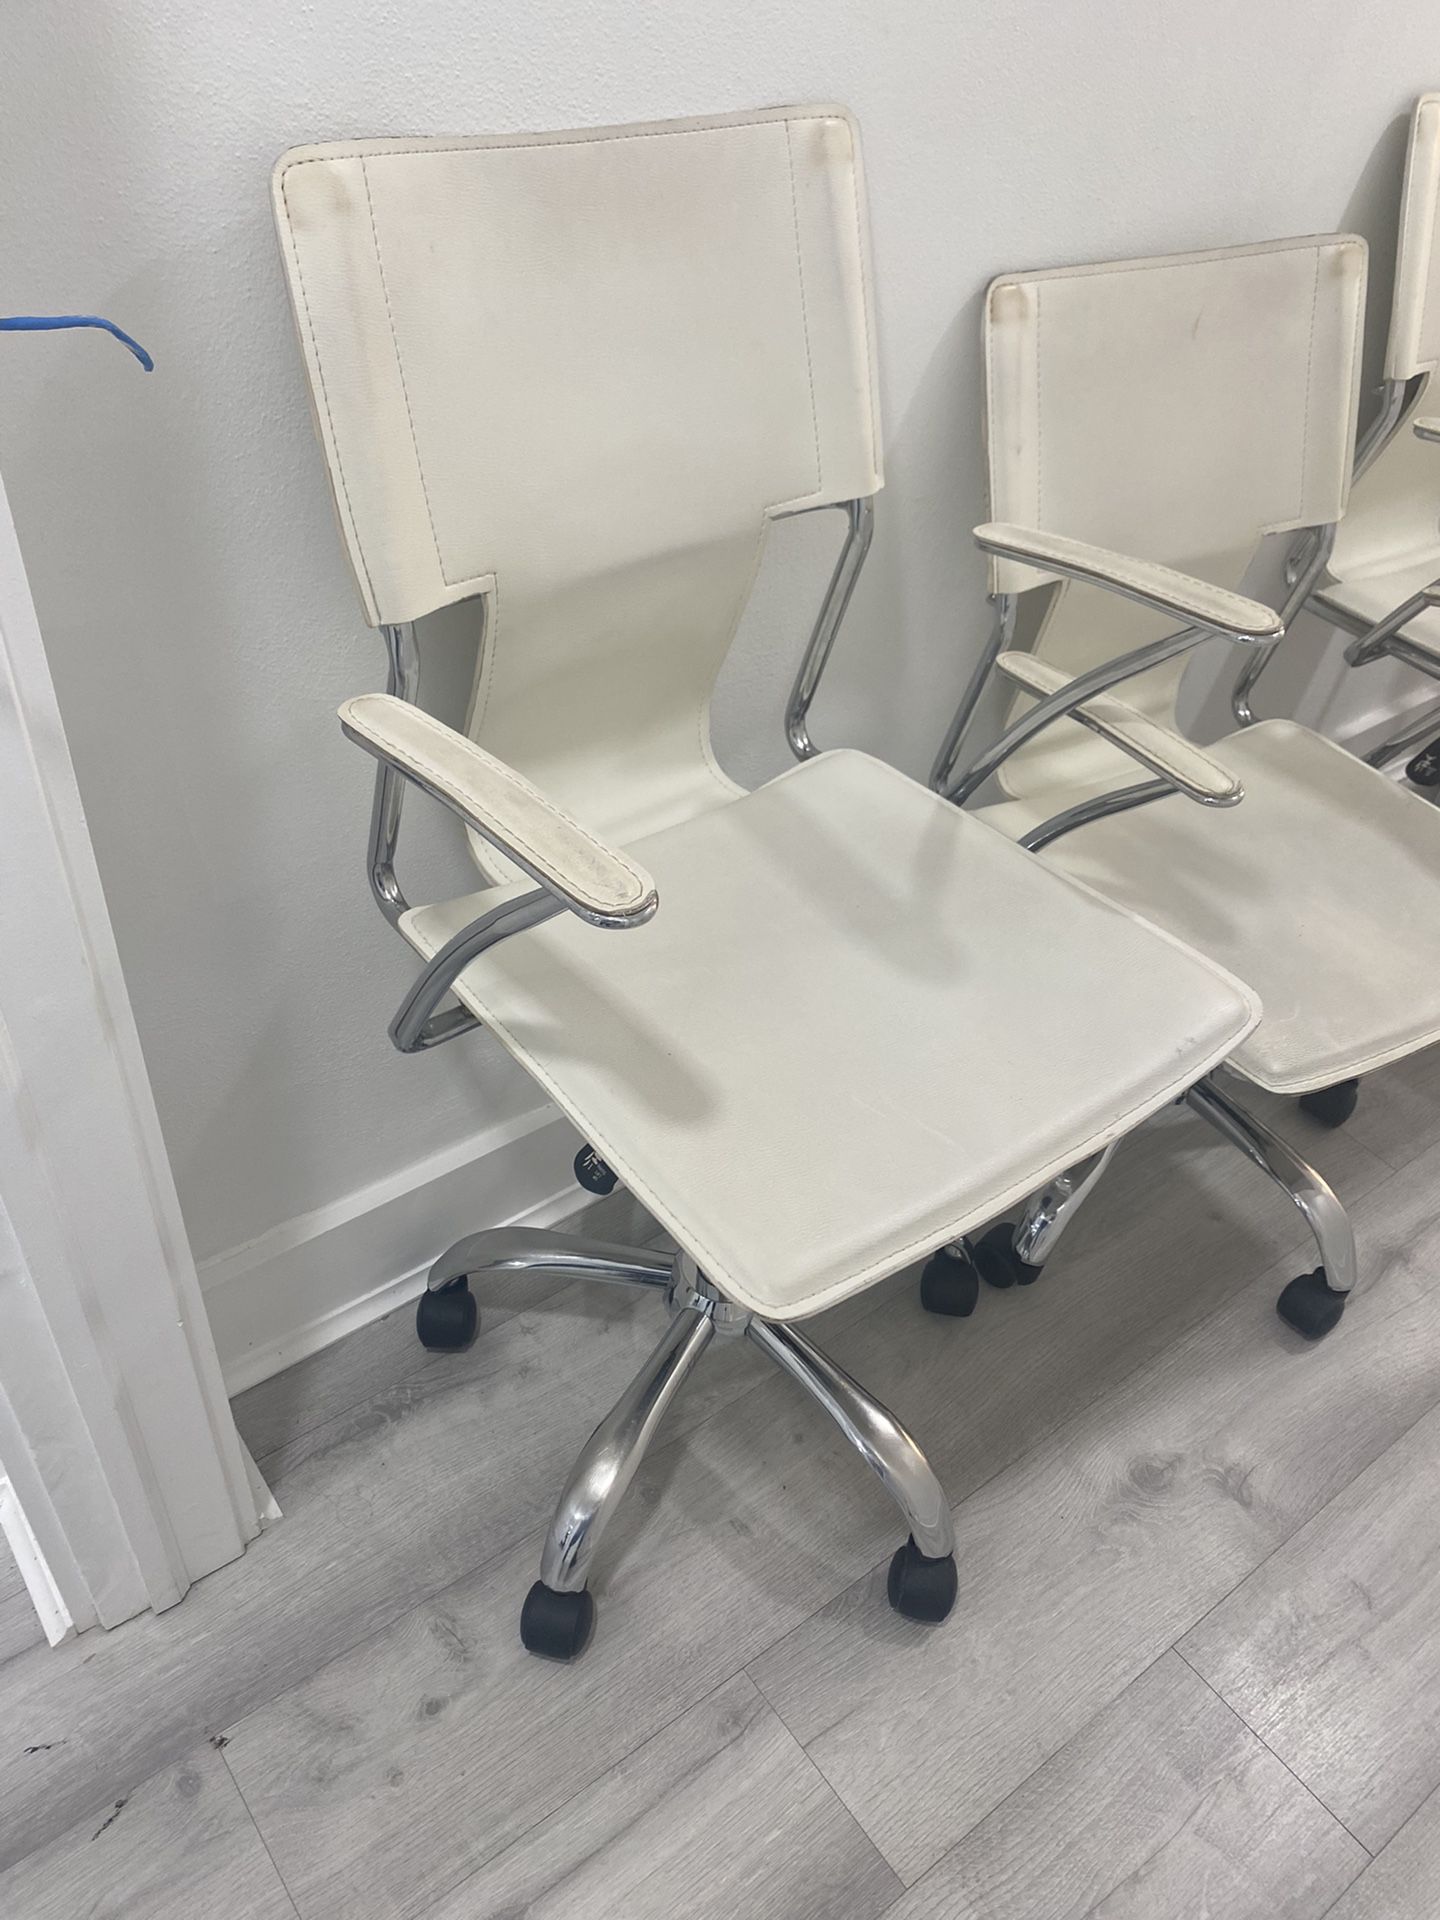  4 White Leather  Chair For Office  20 Each 